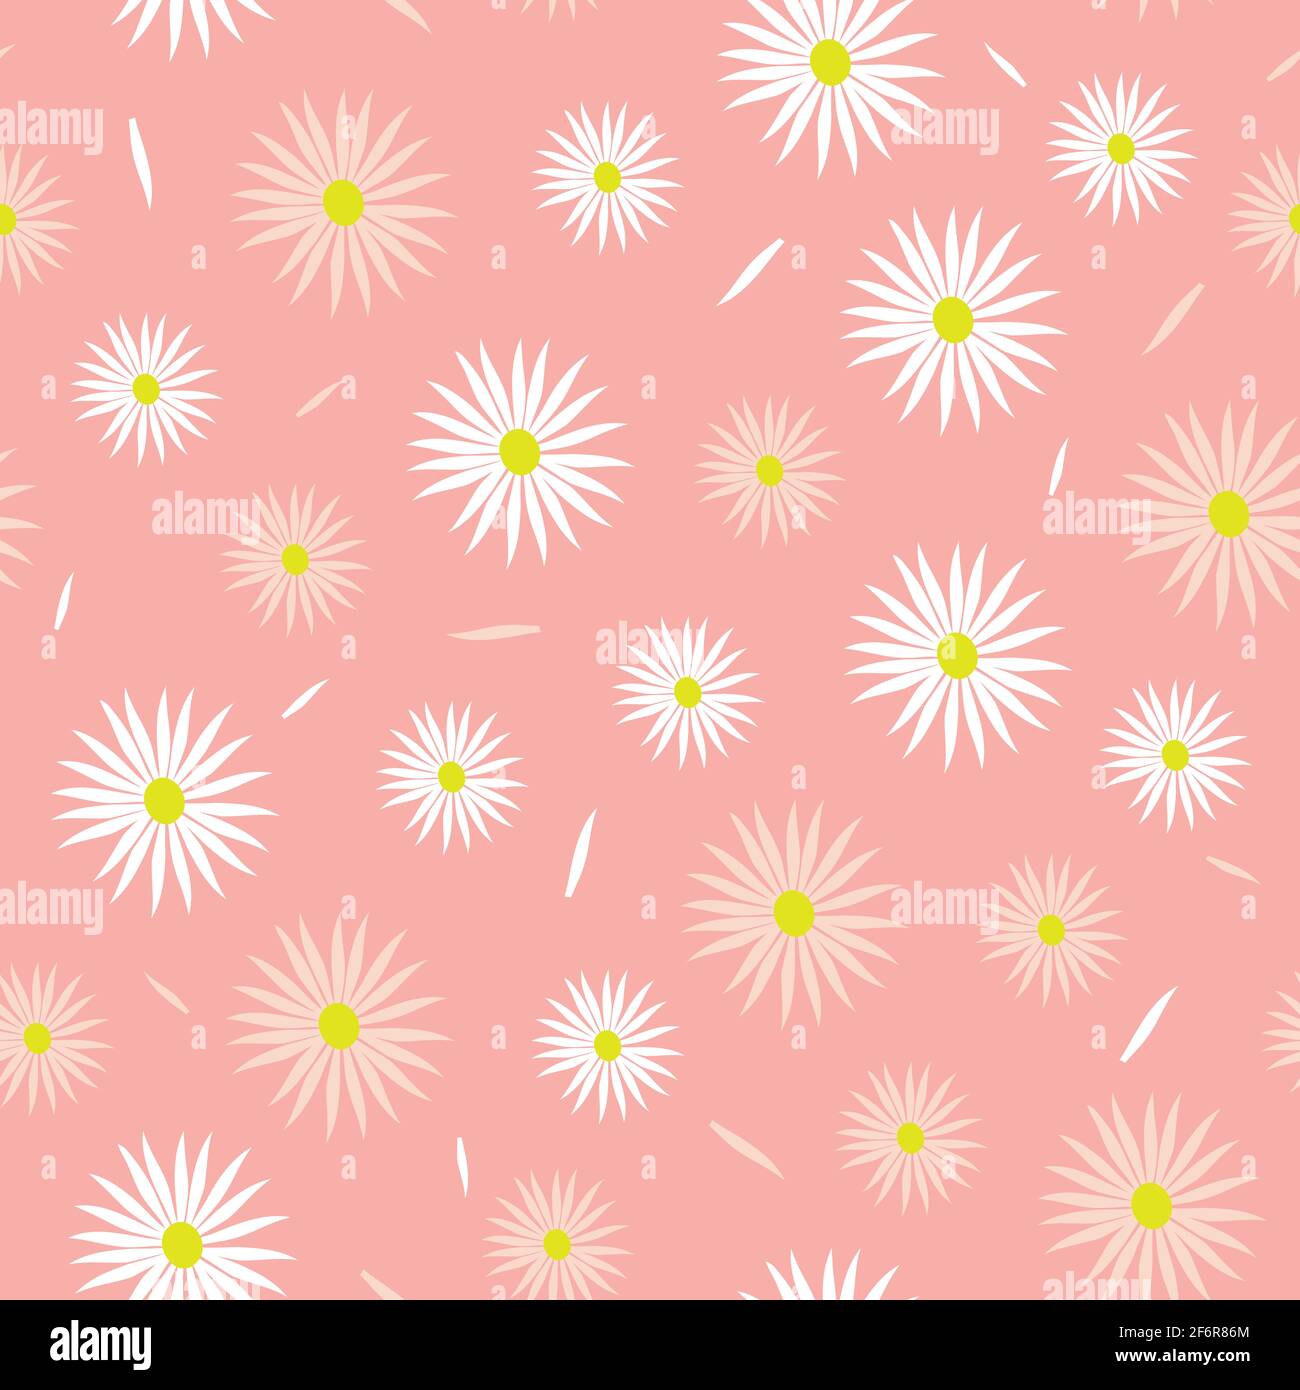 Seamless vector pattern with daisy on pink background. Simple floral wallpaper design . Girly flower repeat fashion tile. Stock Vector